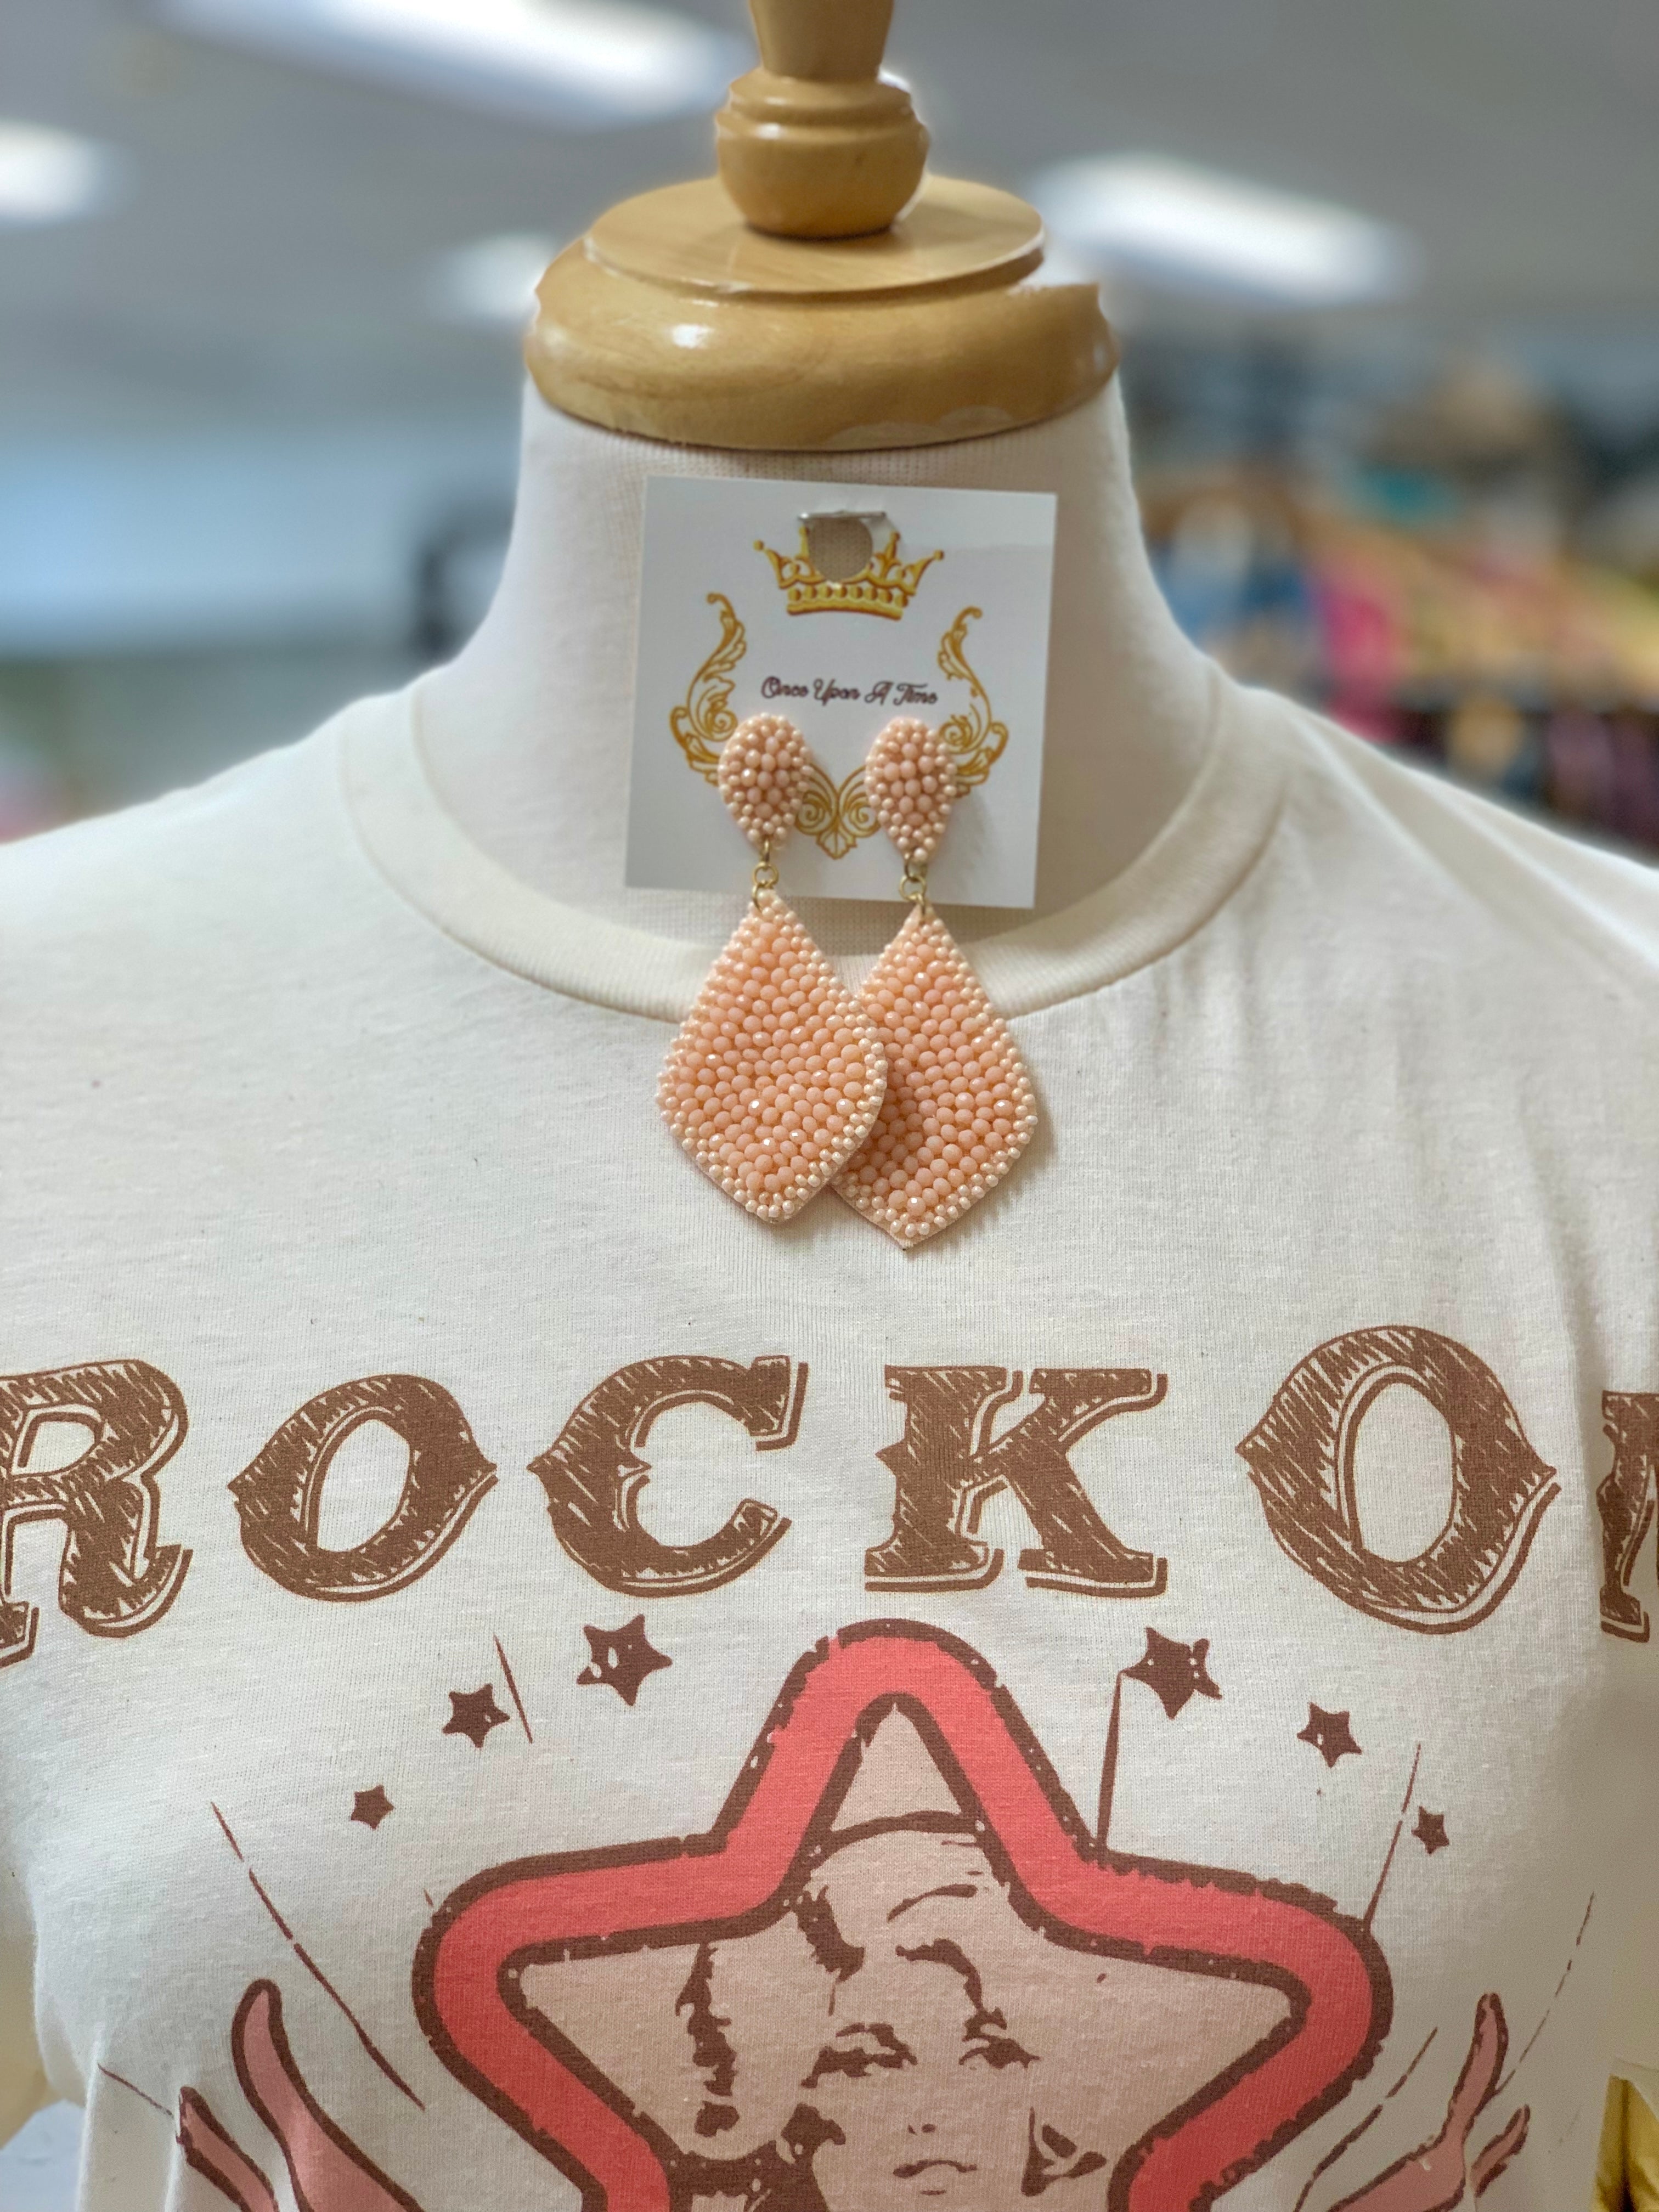 Rock On Dolly T Shirt